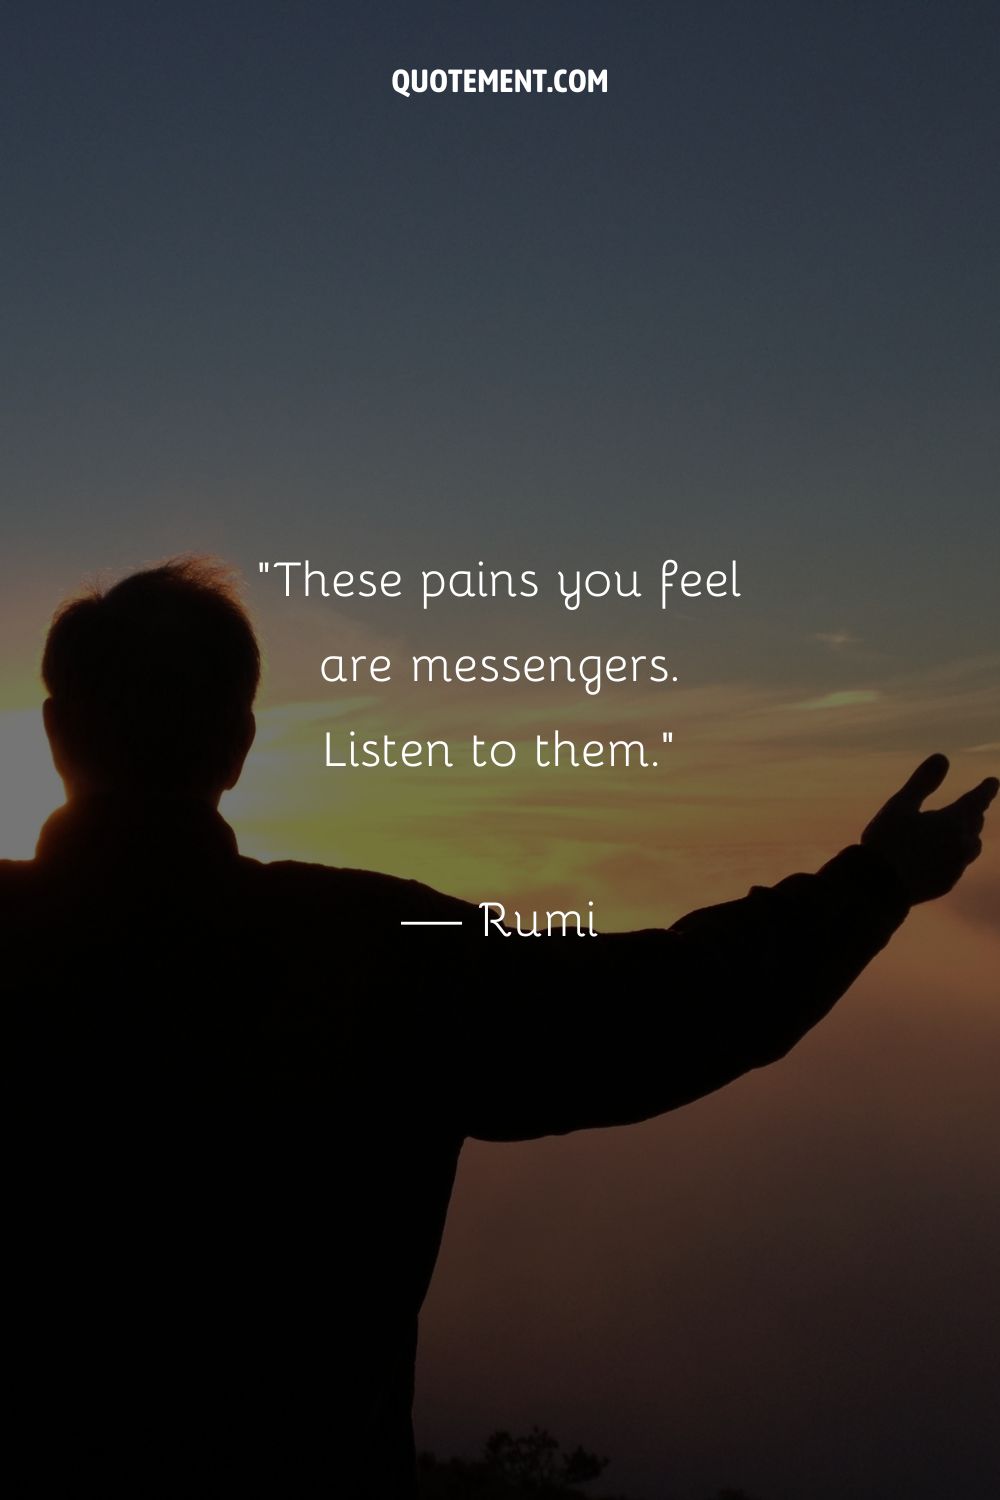 These pains you feel are messengers. Listen to them